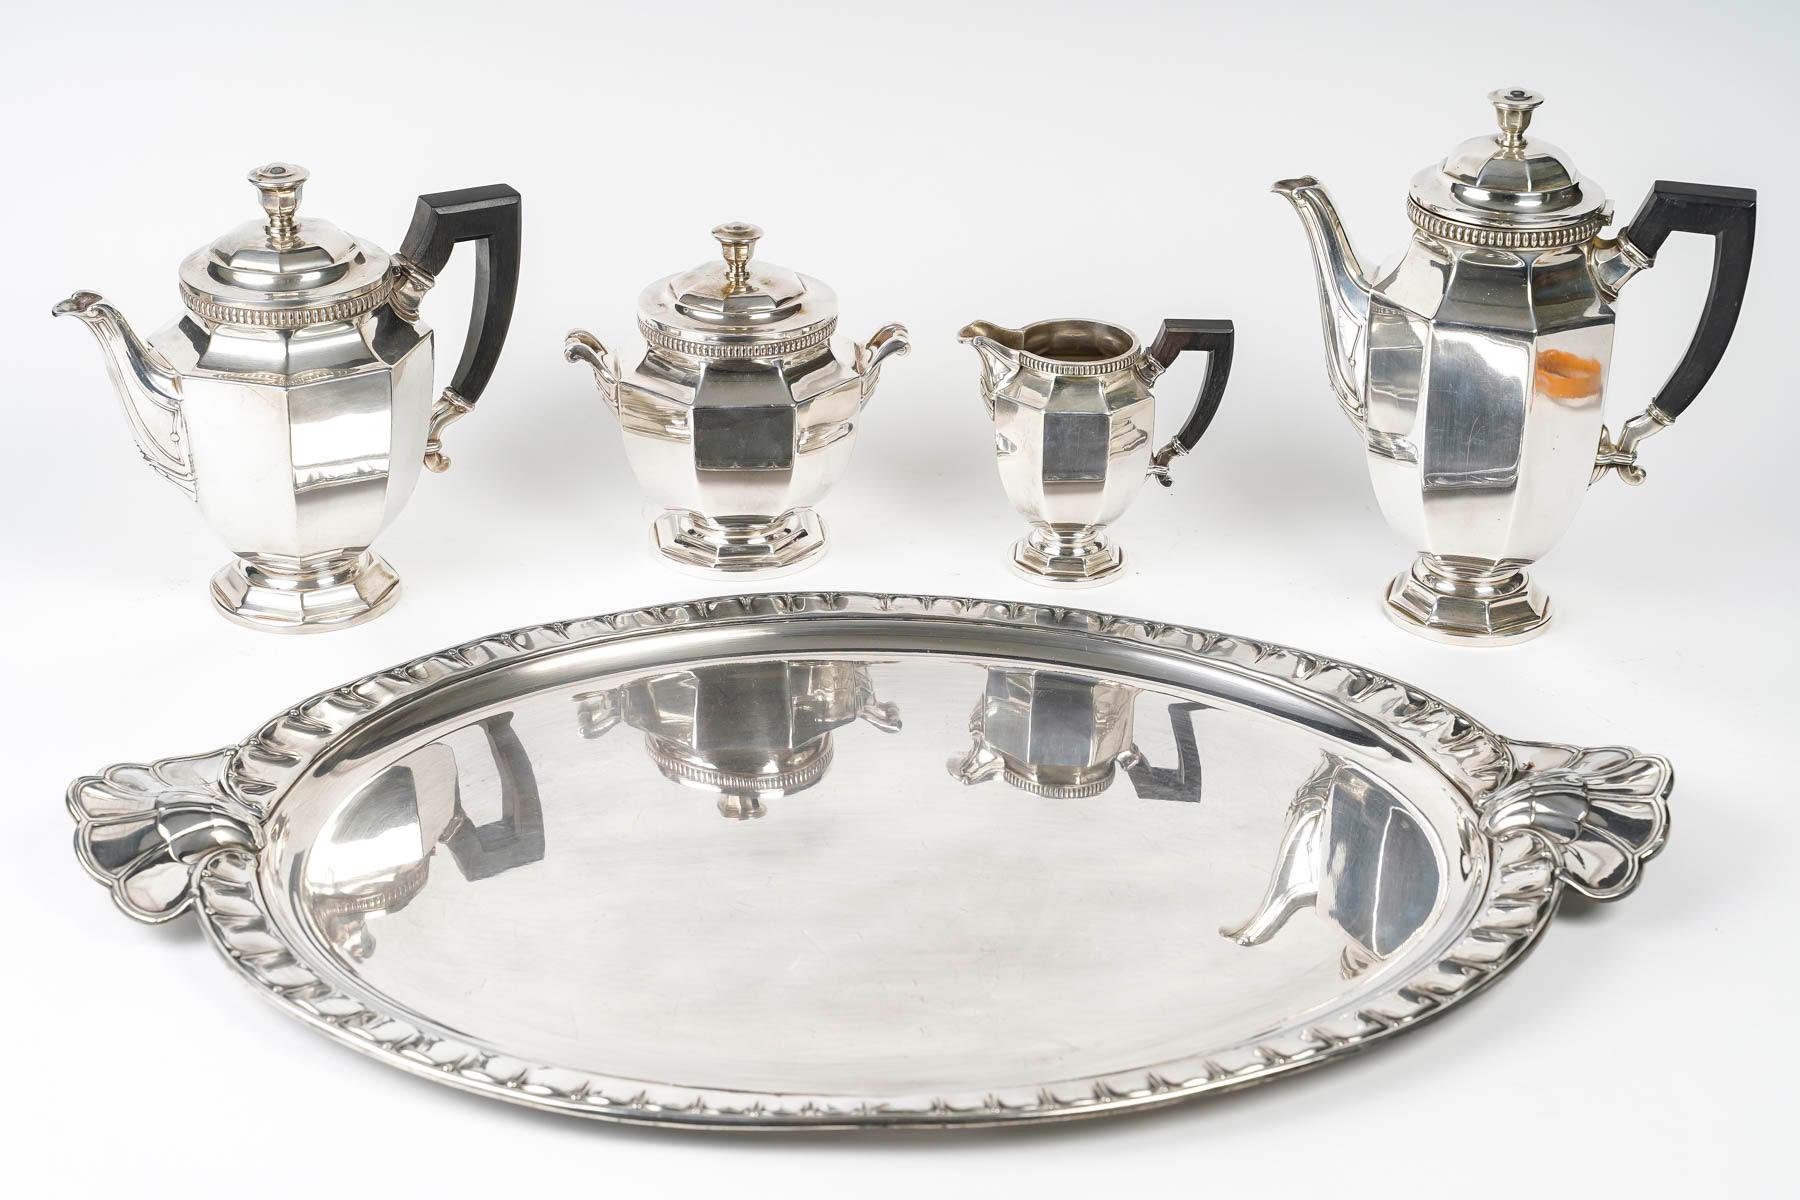 Gallia silver plated tea or coffee service.

Gallia silver plated tea or coffee service, 5 pieces, micro scratches from use, circa 1930, Art Deco.
h: 21cm, w: 60cm, d: 40cm